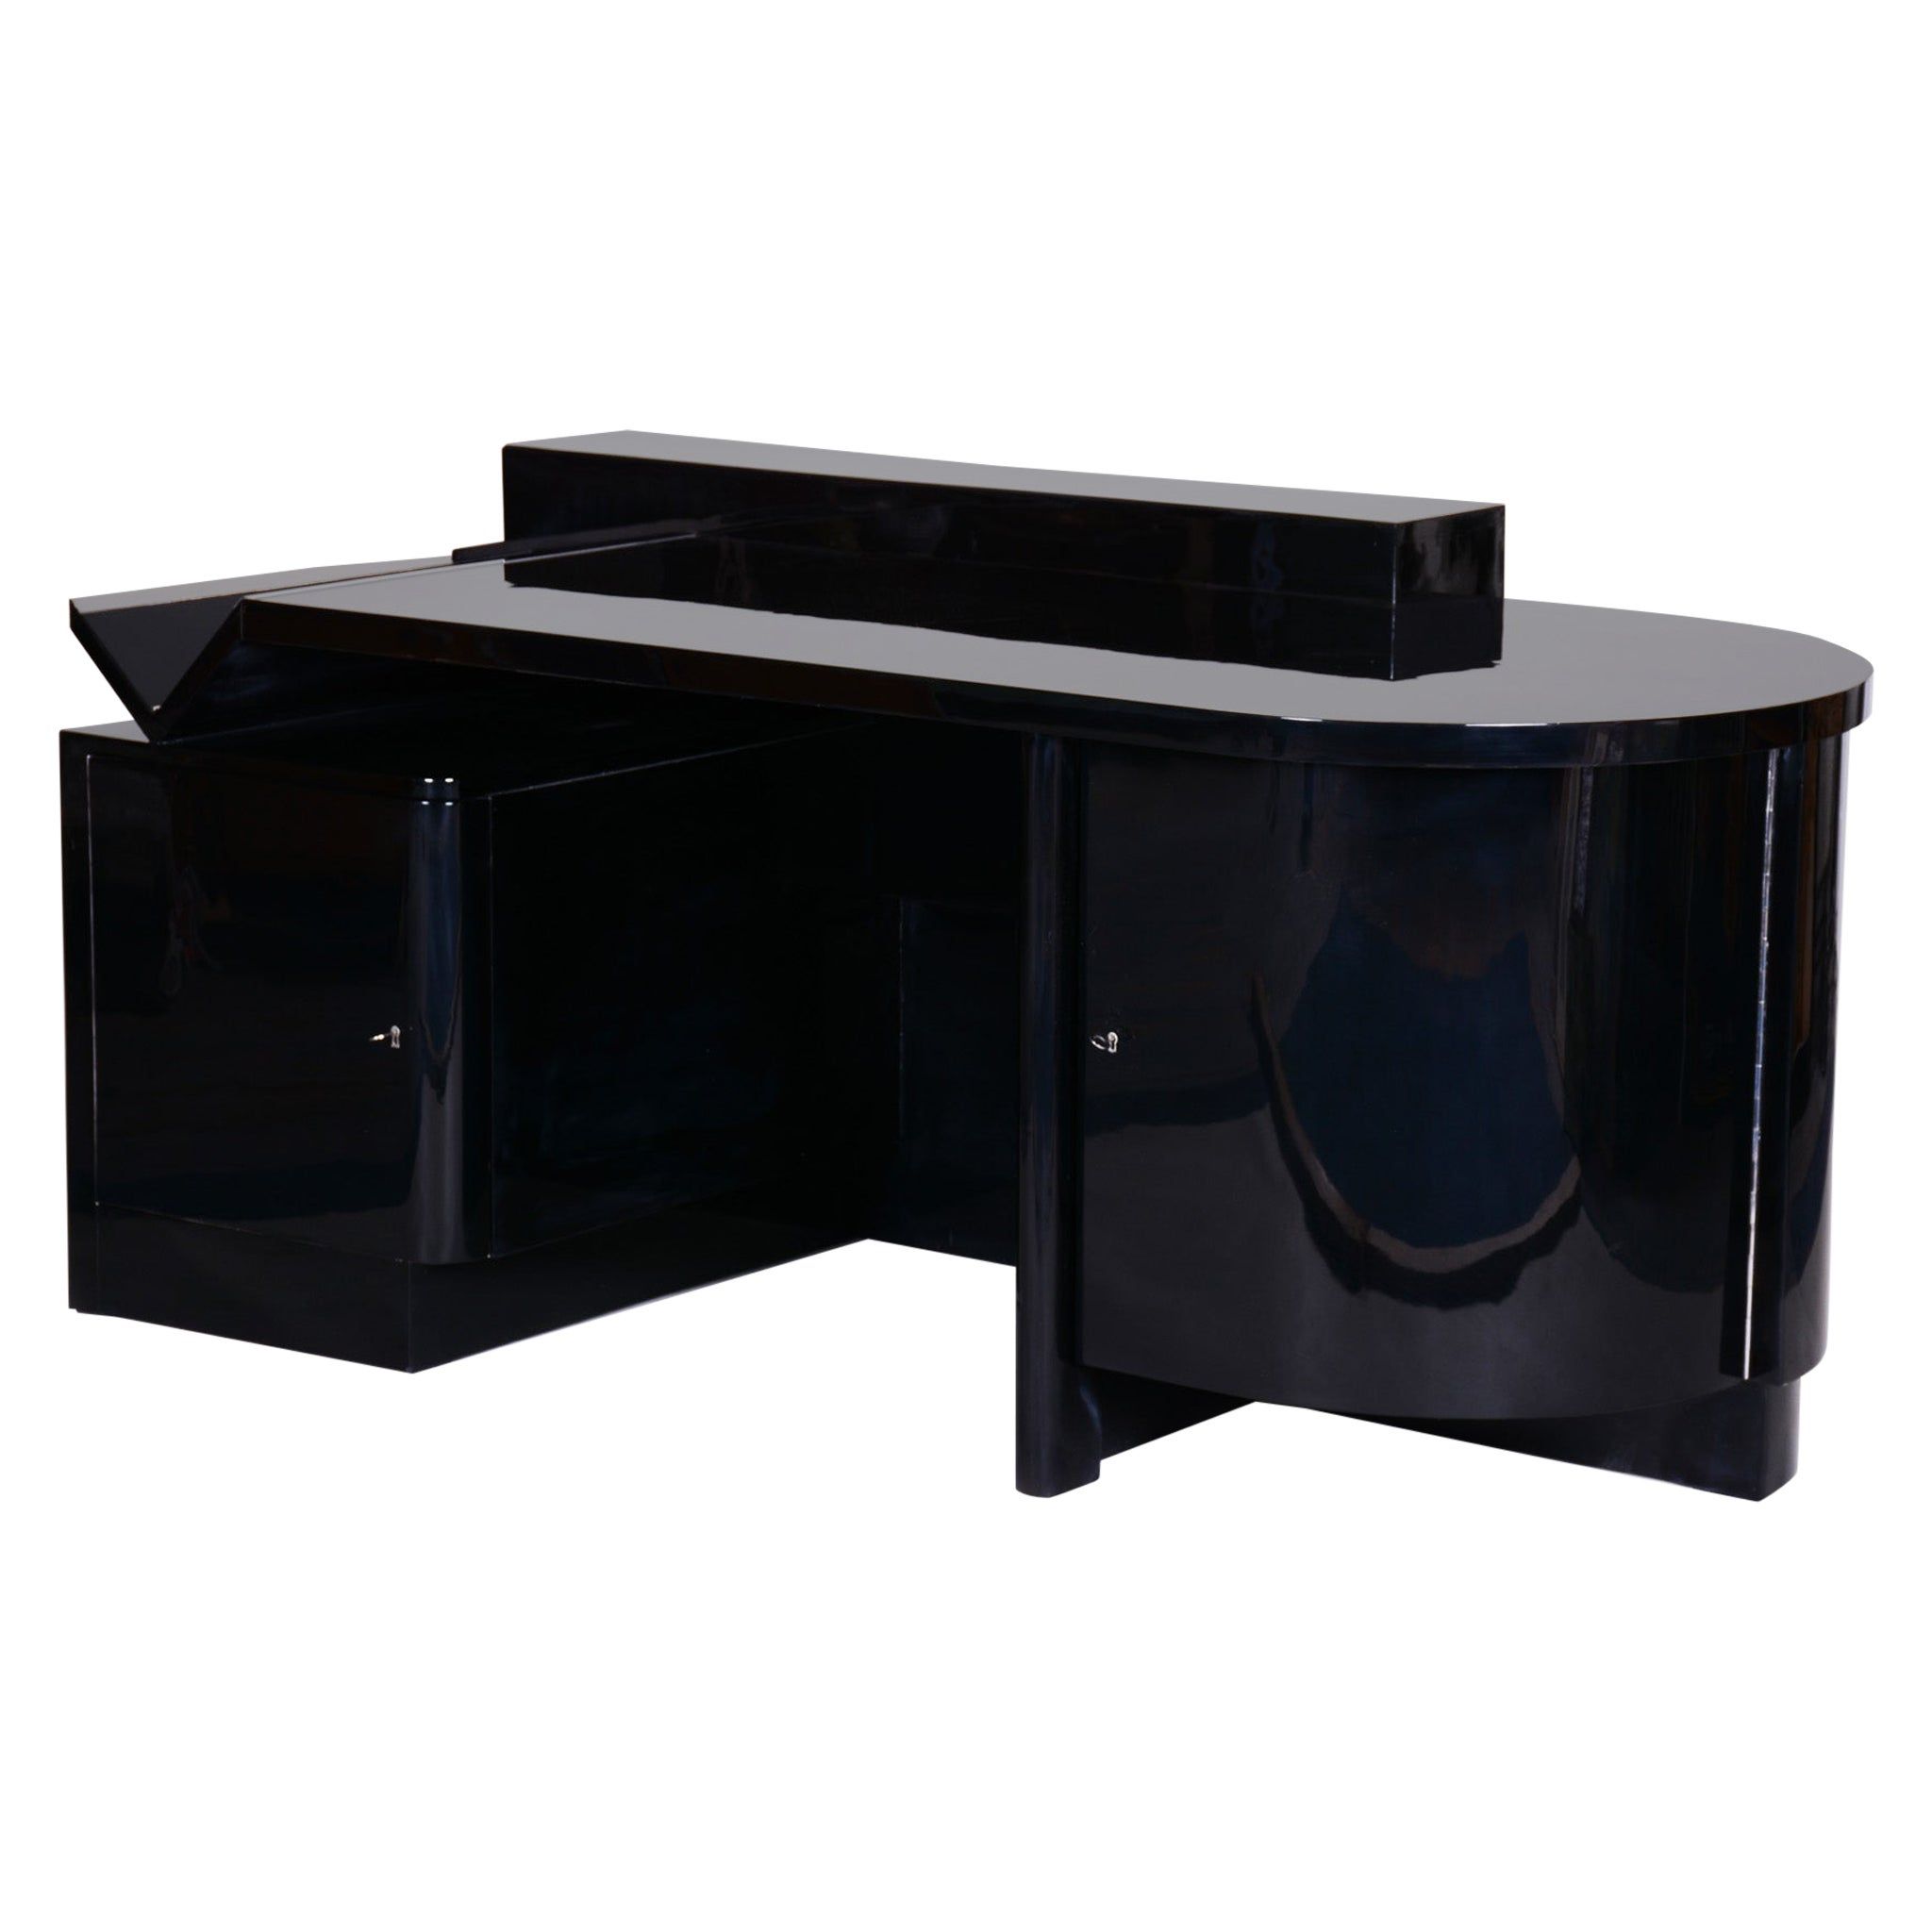 High Gloss Black Lacquer Writing Desk With Polished Stainless Steel Throughout Lacquer And Gold Writing Desks (View 10 of 15)